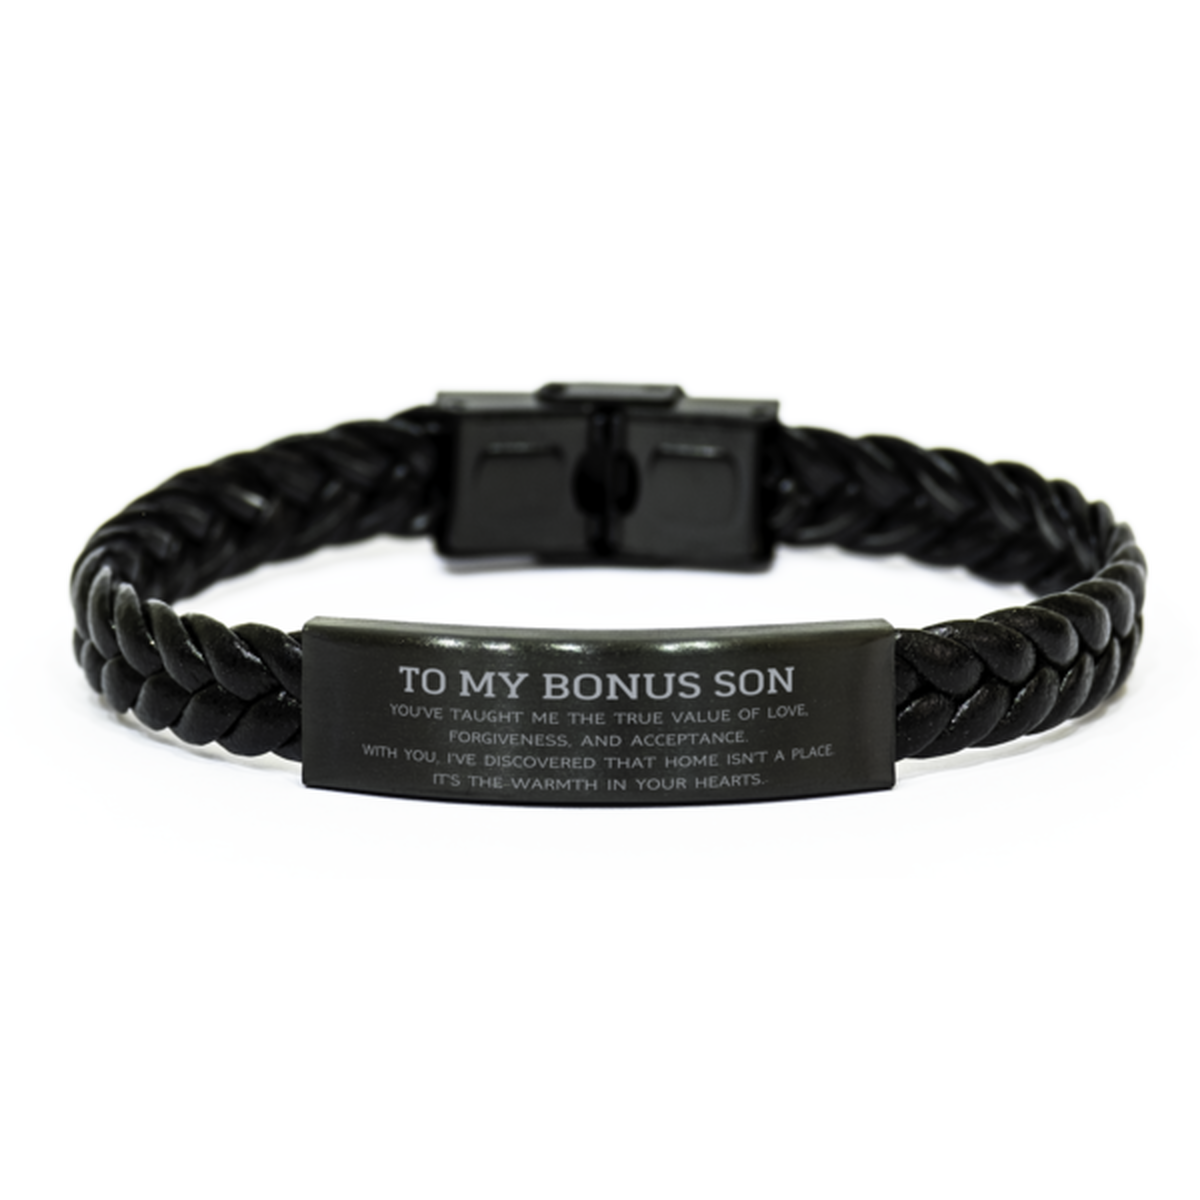 To My Bonus Son Gifts, You've taught me the true value of love, Thank You Gifts For Bonus Son, Birthday Braided Leather Bracelet For Bonus Son